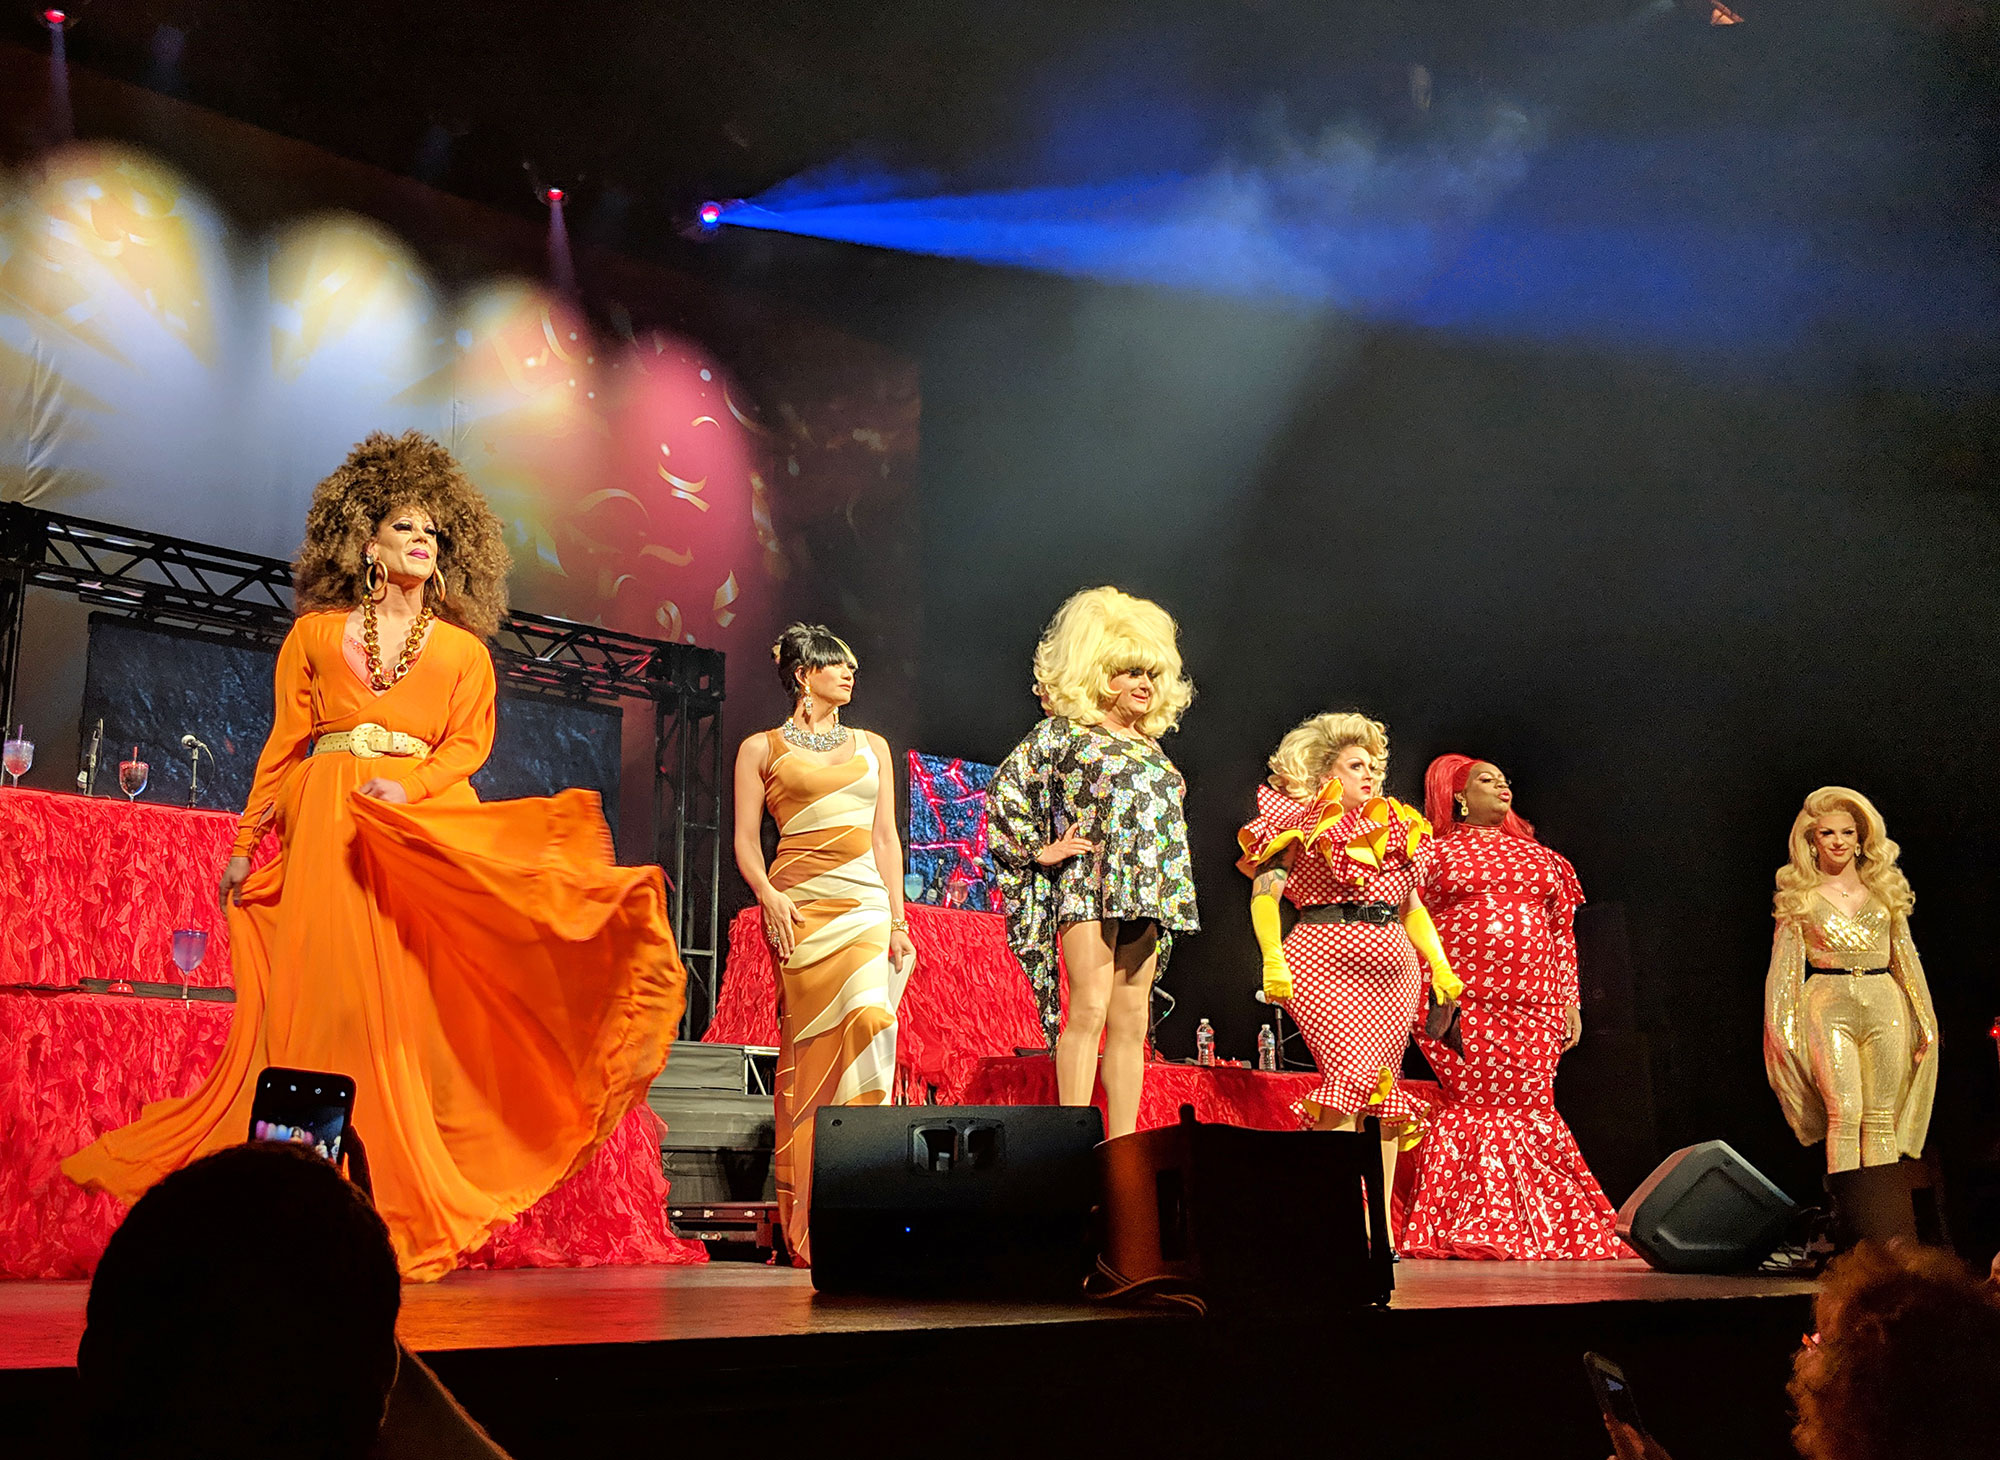 Thorgy Thor and friends at the RuPaul's Drag Race Hater's Roast.